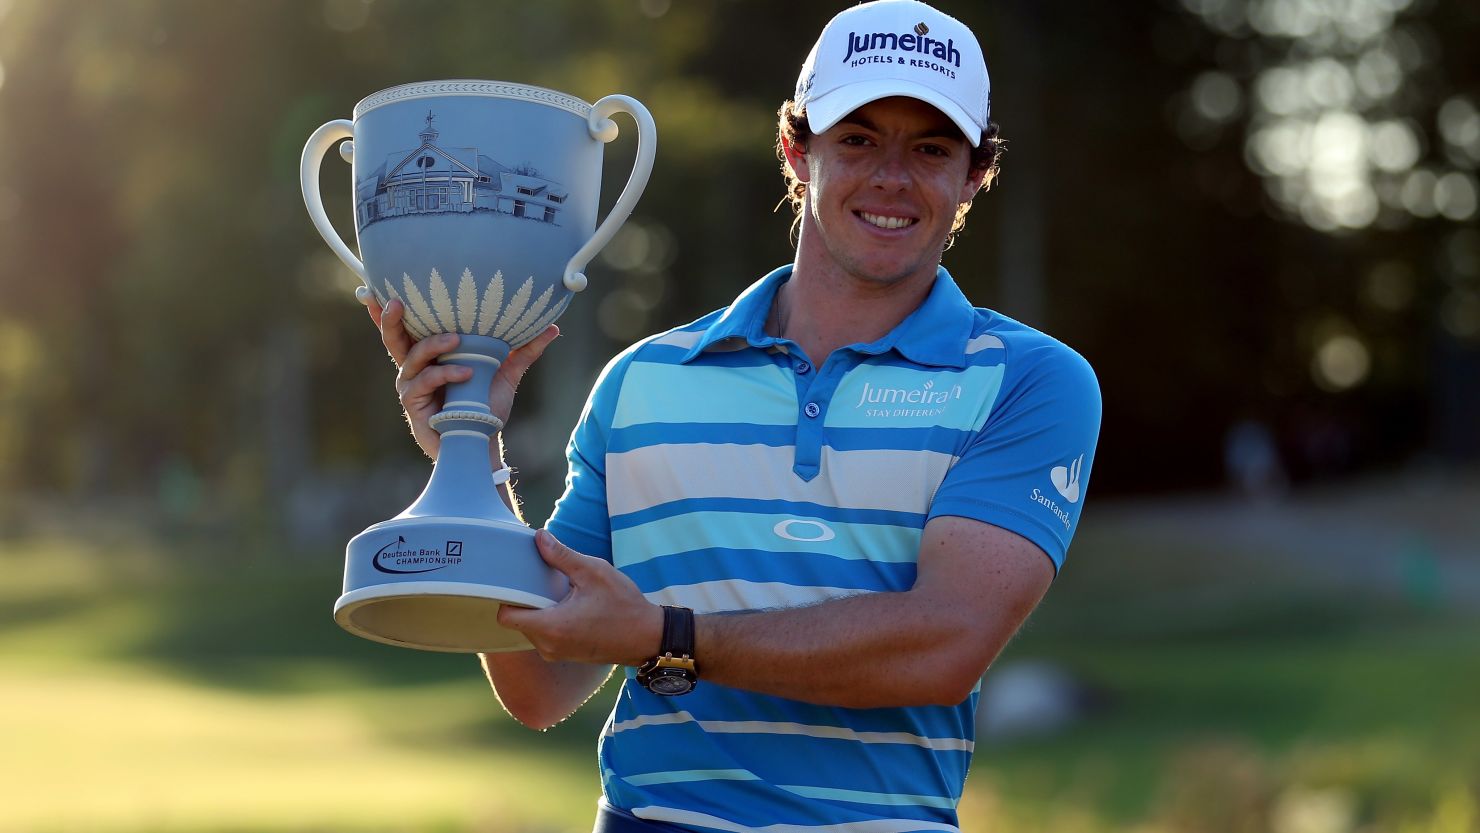 Rory McIlroy claimed the fifth PGA Tour title of his career on Monday with victory at the TPC Boston 